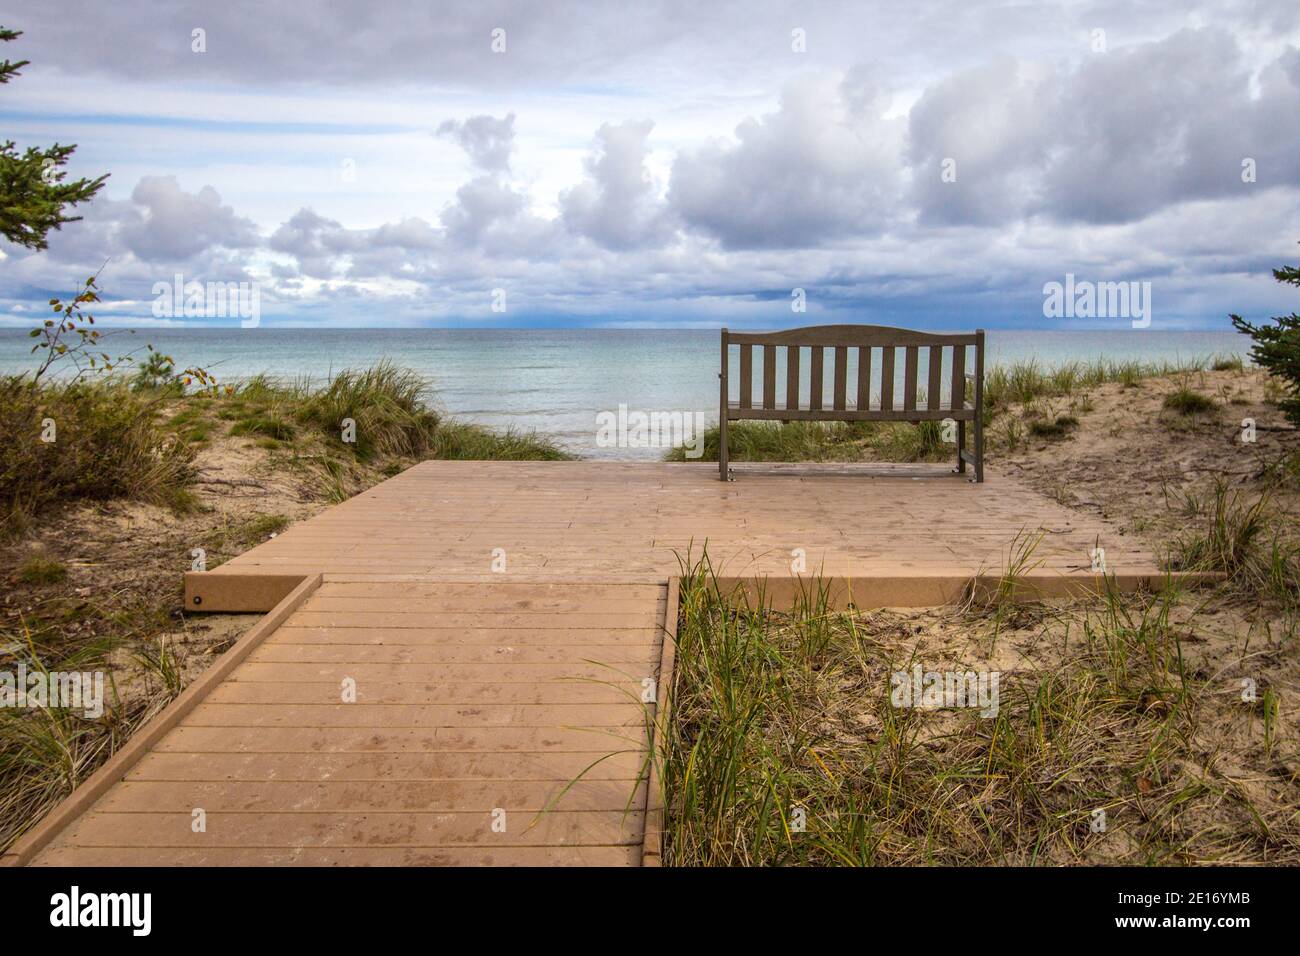 The End. Boardwalk path to an empty park bench overlooking a beautiful lake horizon on the coast of Lake Superior. Stock Photo